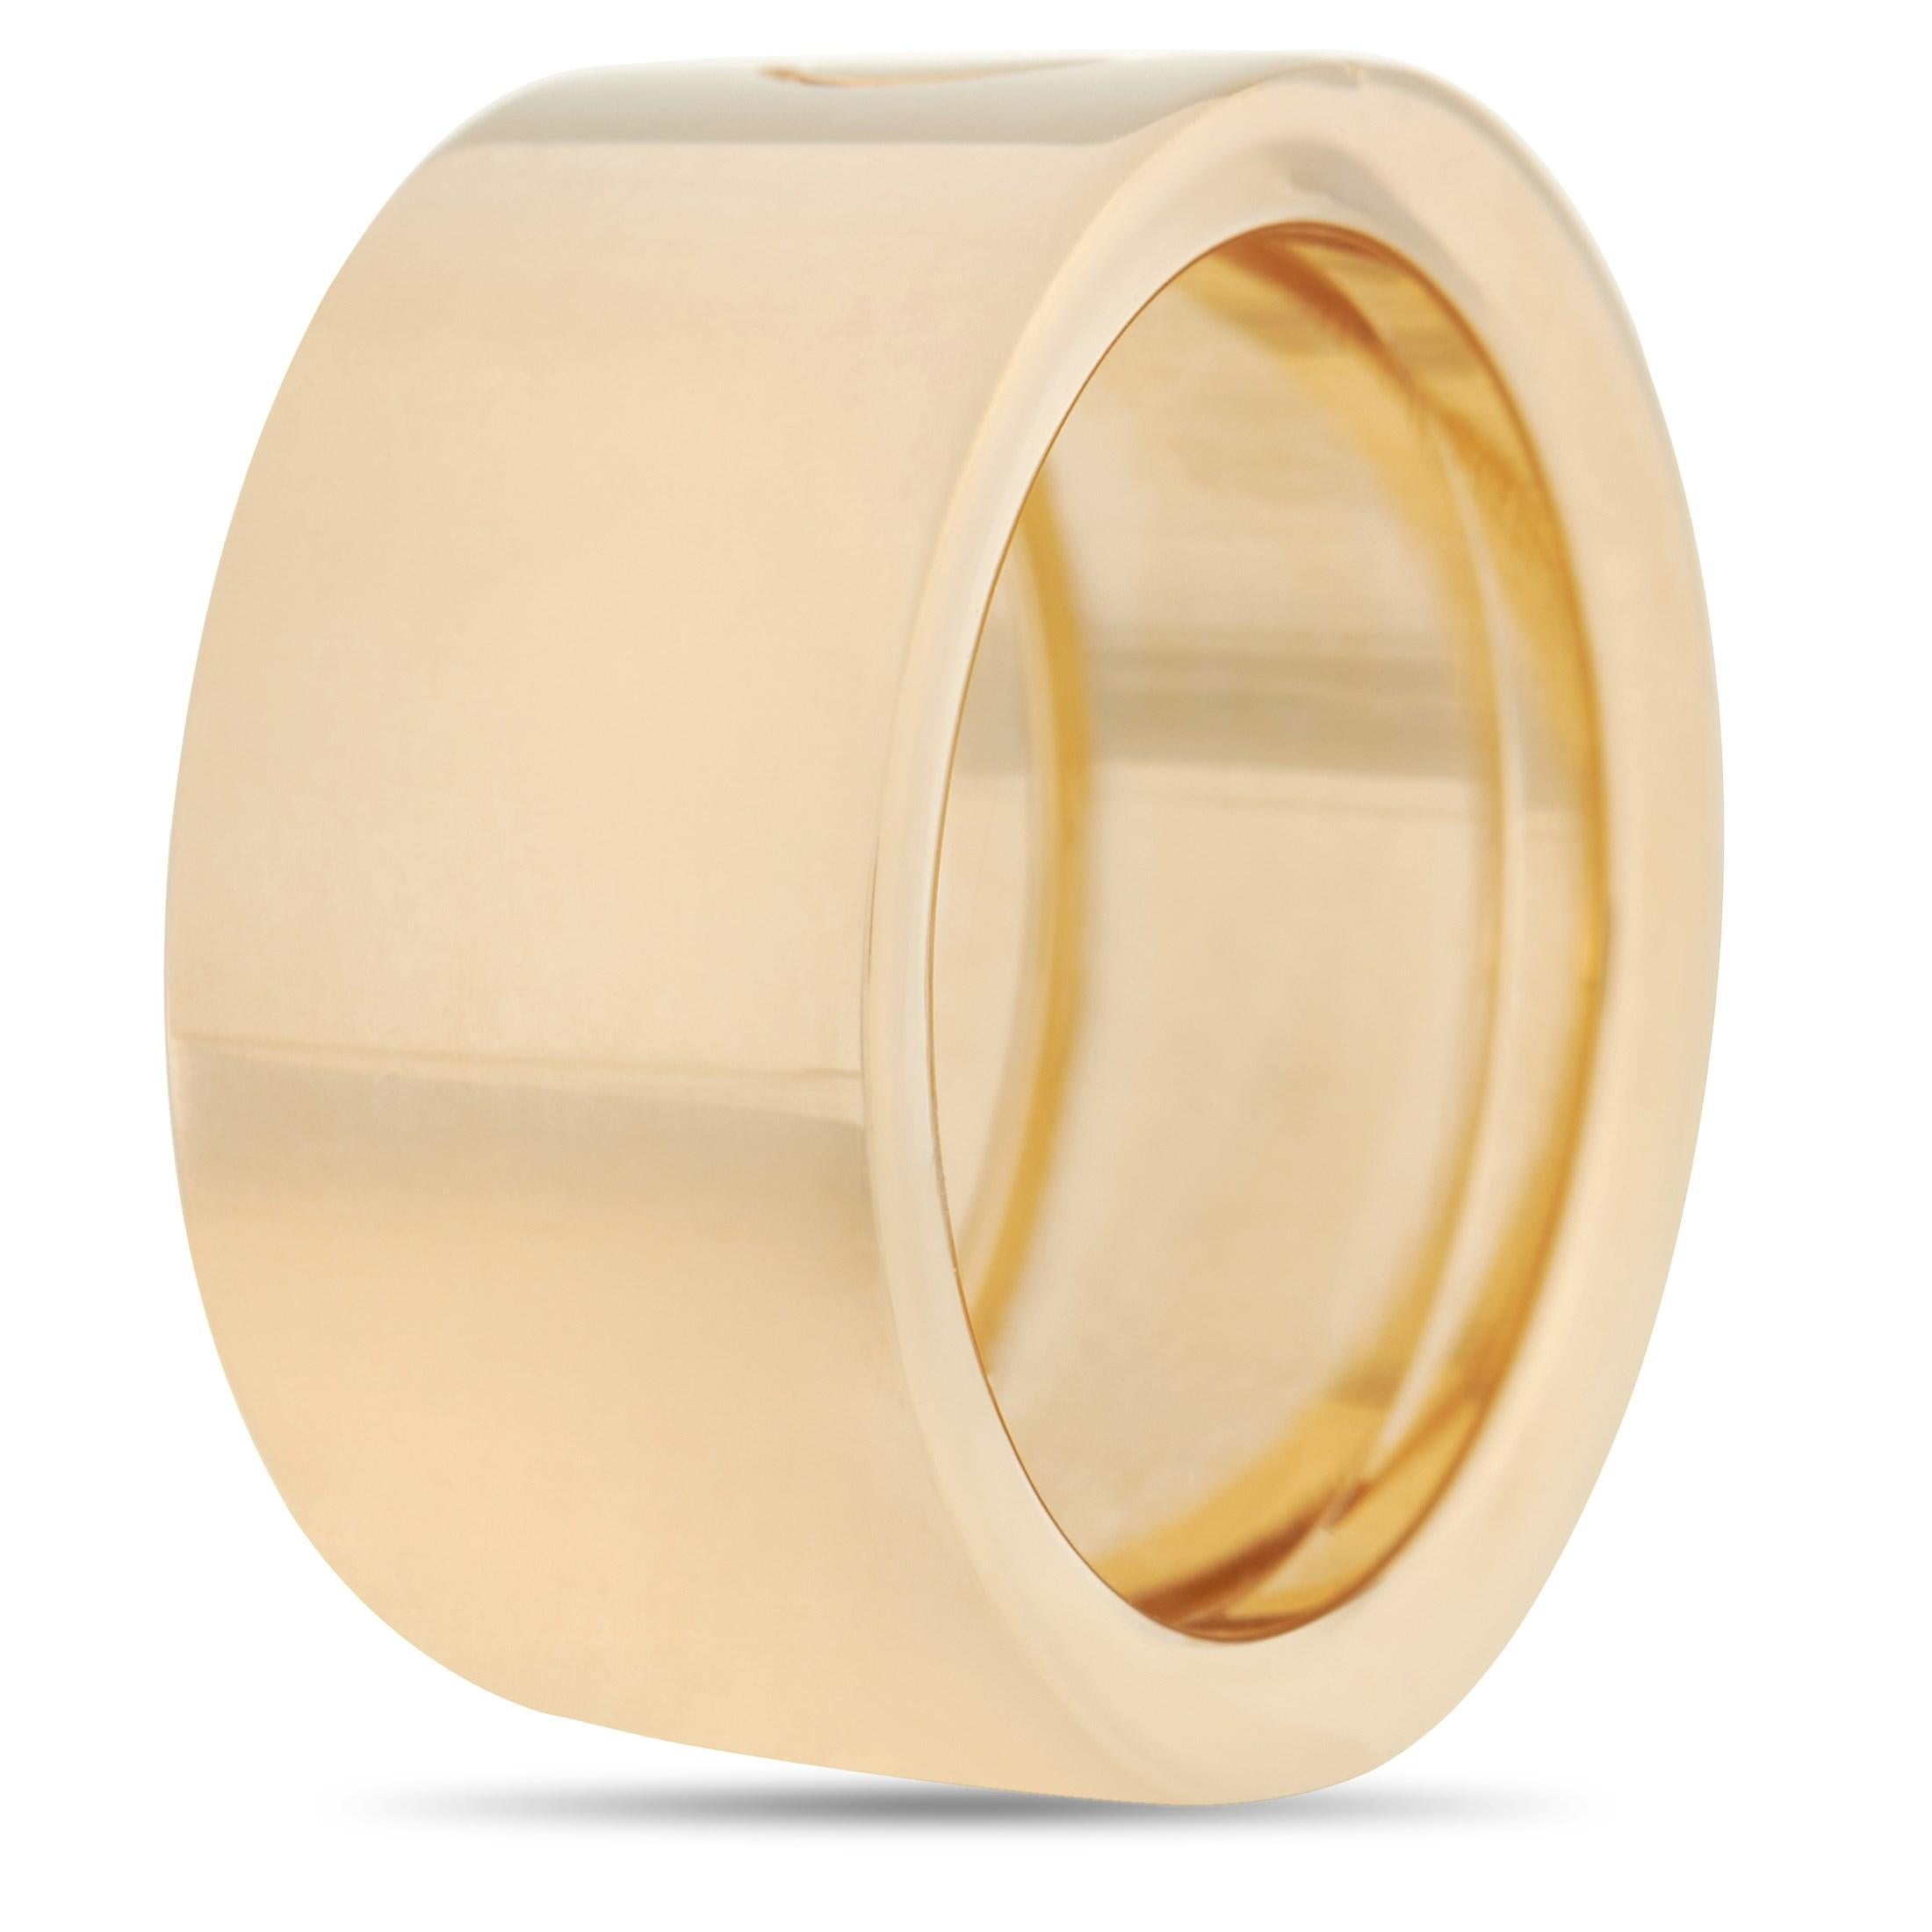 This bold Cartier Love 18K Yellow Gold Screw Ring is a classic Cartier ring. The simple band is made with 18K yellow gold and features the iconic Cartier screw motif in the center of the band. The inside of the band is inscribed with the brand name.